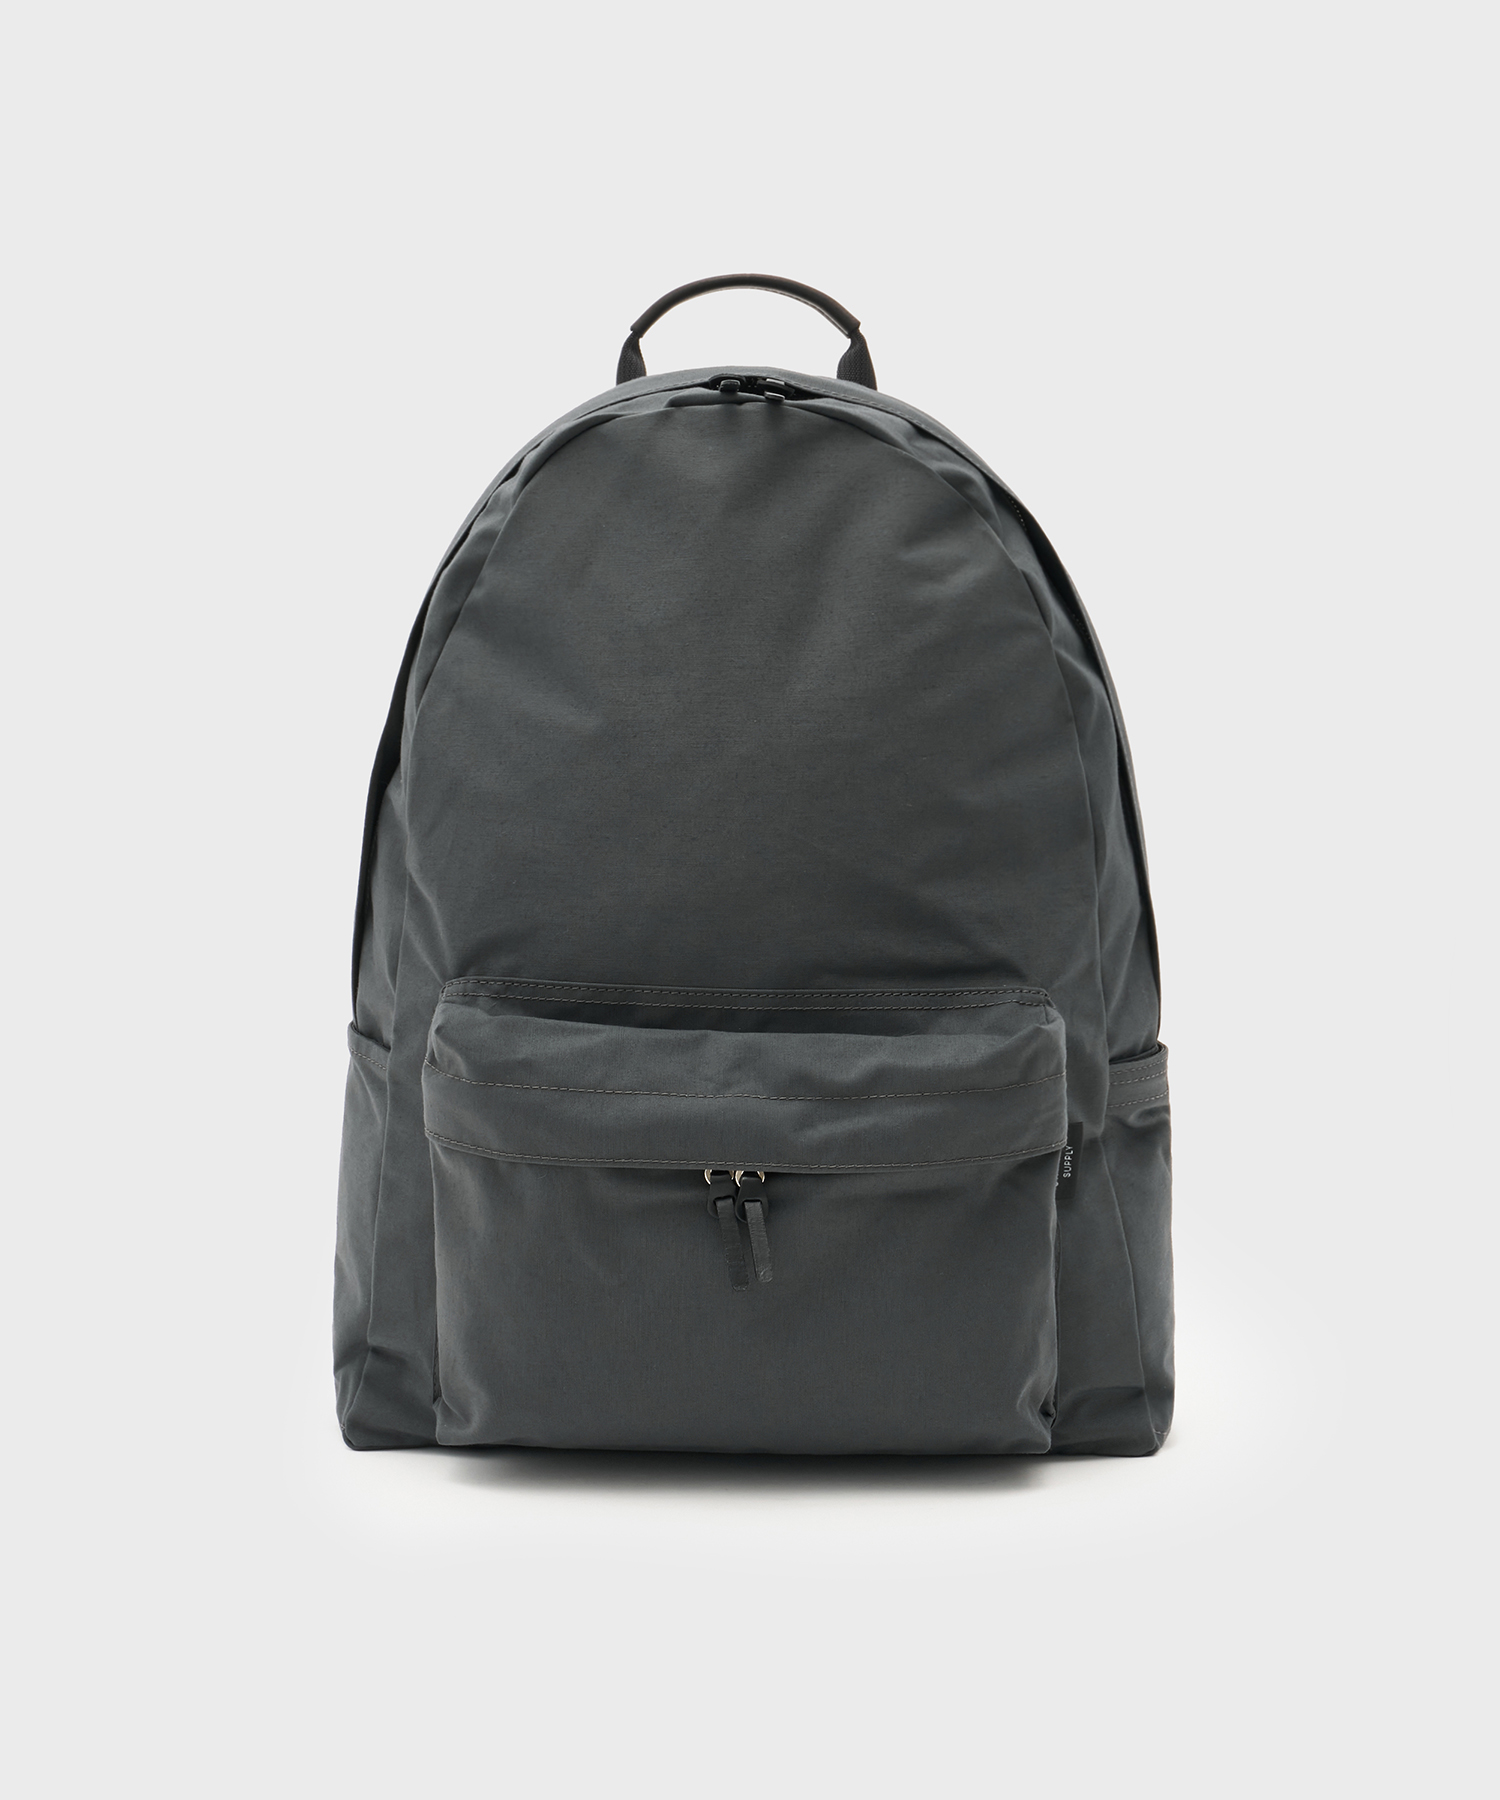 Simplictity Daily Daypack (Steel Grey)